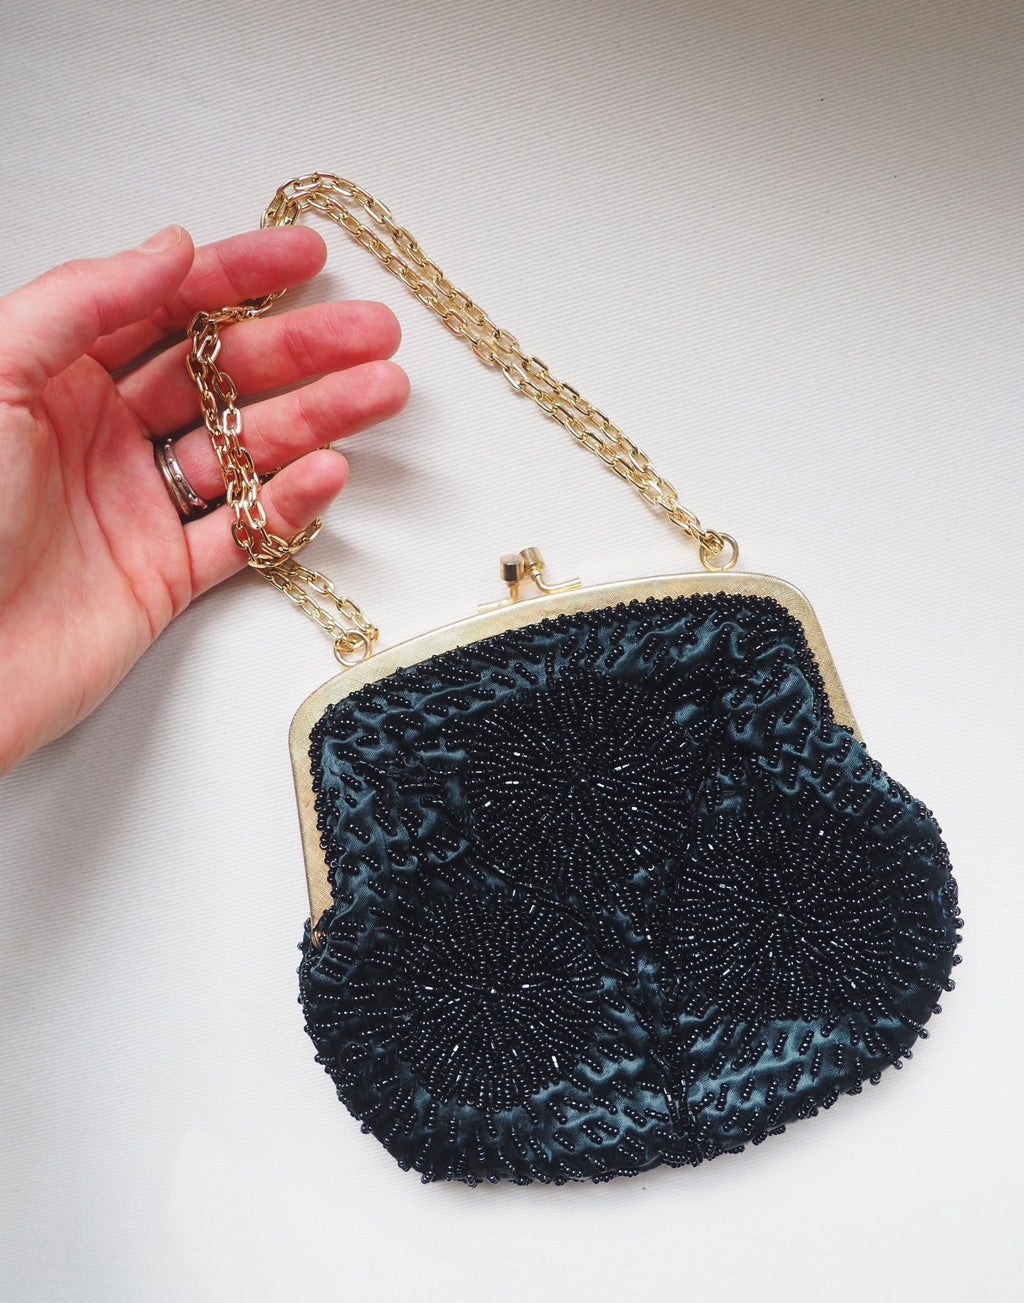 Vintage Black Beaded Evening Purse with Gold Chain